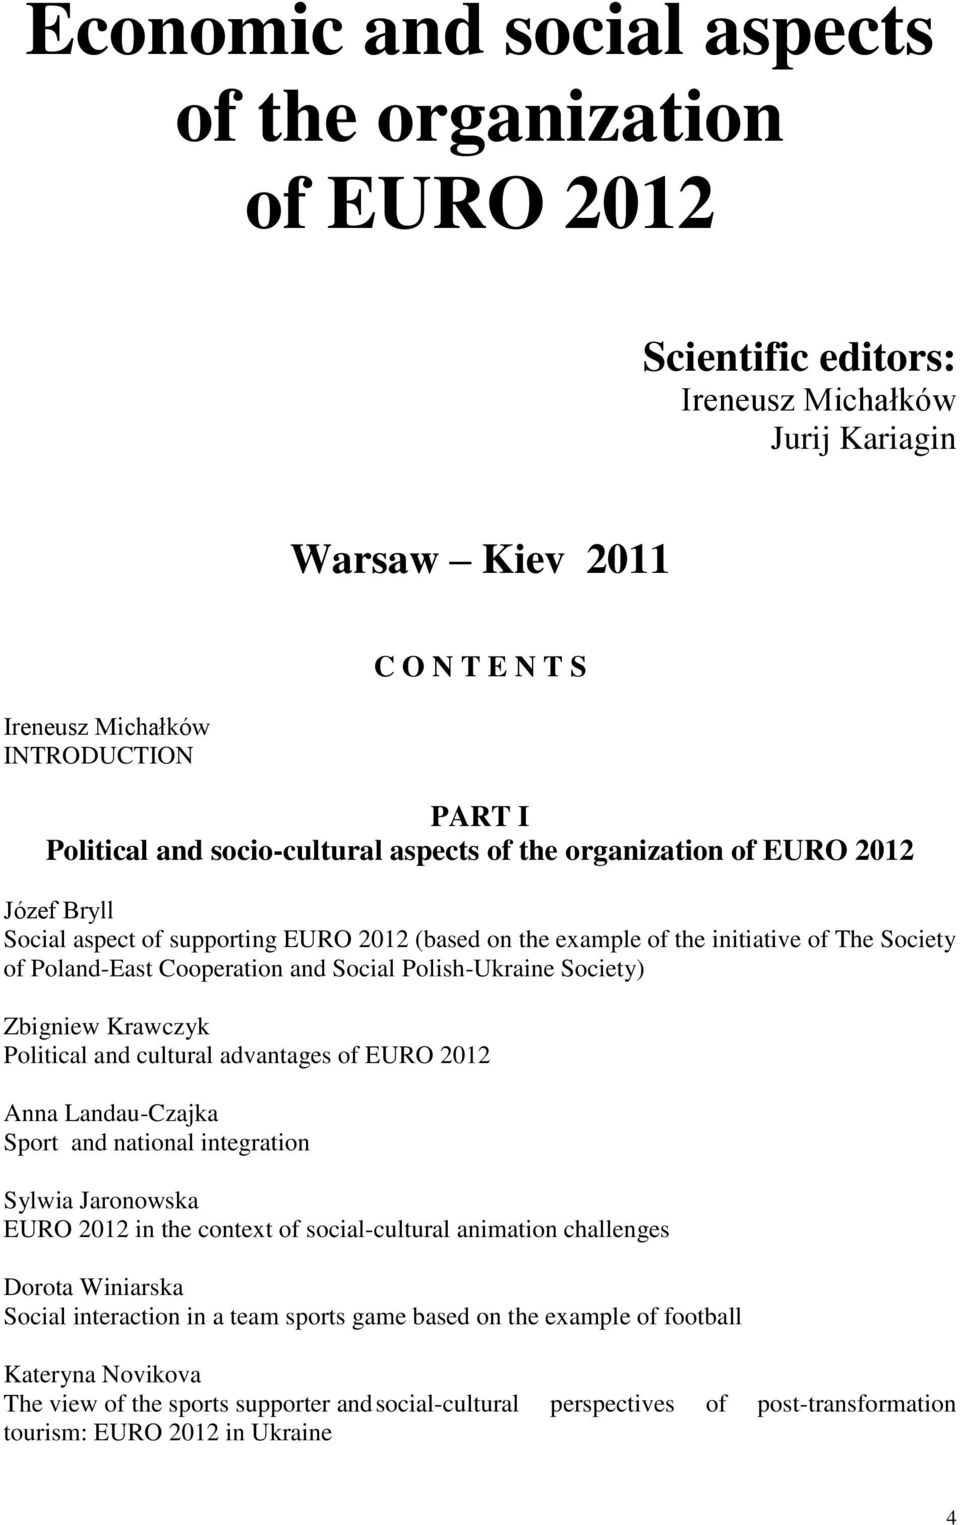 Zbigniew Krawczyk Political and cultural advantages of EURO 2012 Anna Landau-Czajka Sport and national integration Sylwia Jaronowska EURO 2012 in the context of social-cultural animation challenges